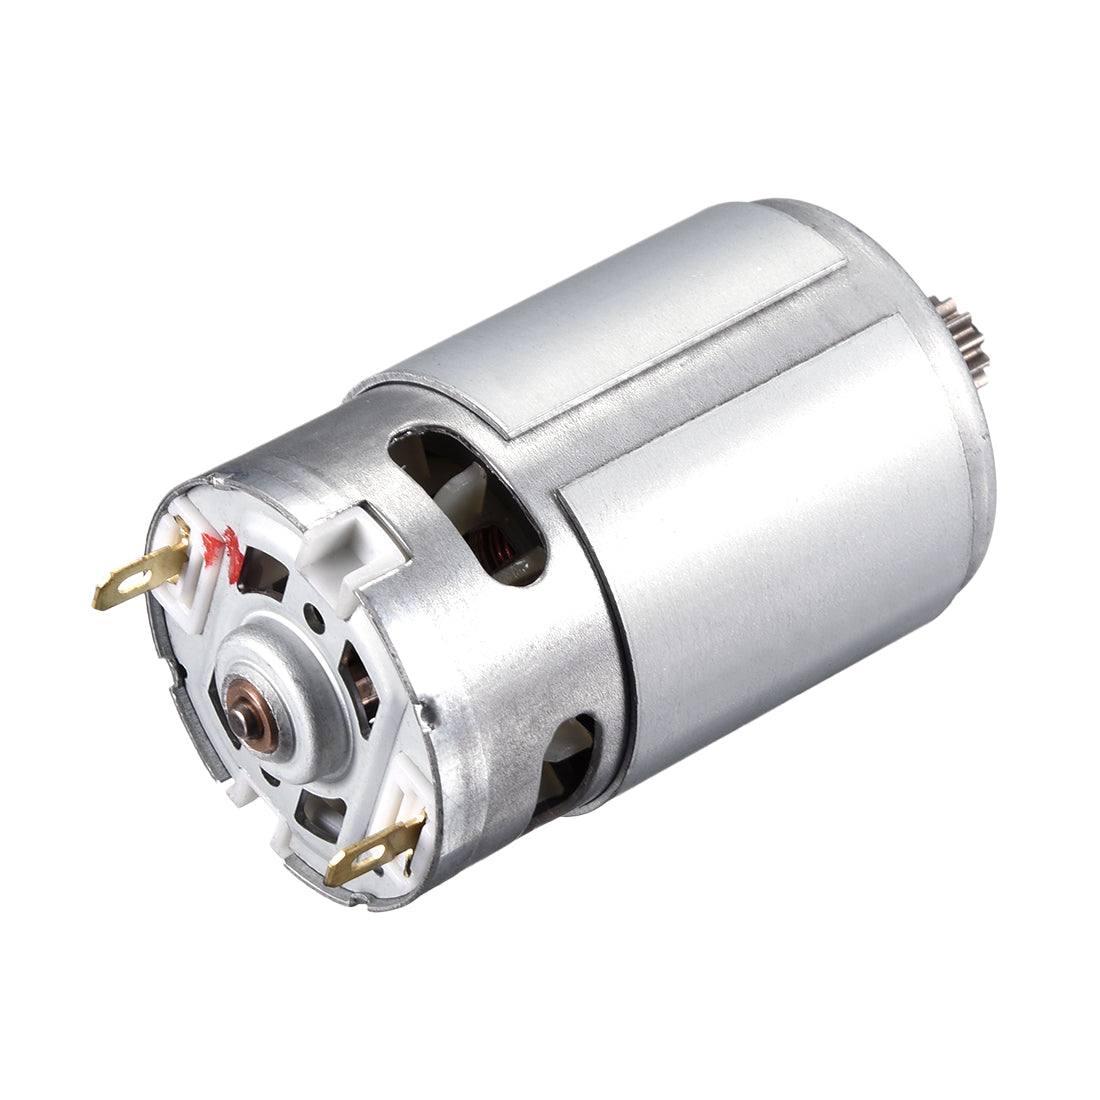 uxcell Uxcell DC 16.8V 23000RPM Electric Gear Motor 12 Teeth for Various Cordless Screwdriver